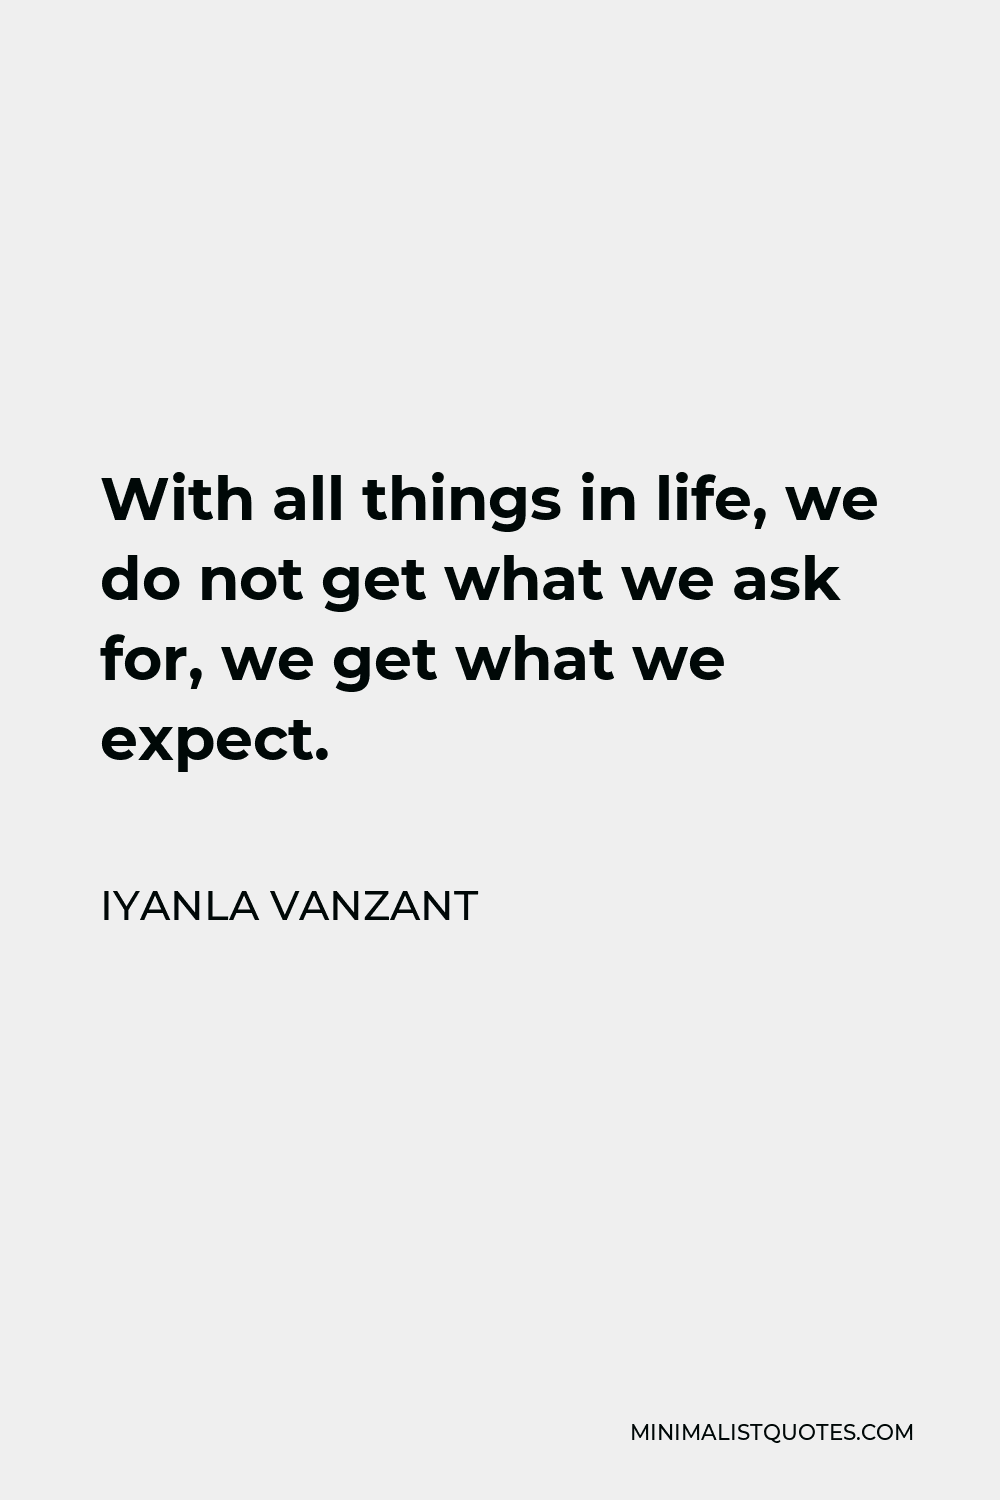 Iyanla Vanzant Quote - With all things in life, we do not get what we ask for, we get what we expect.